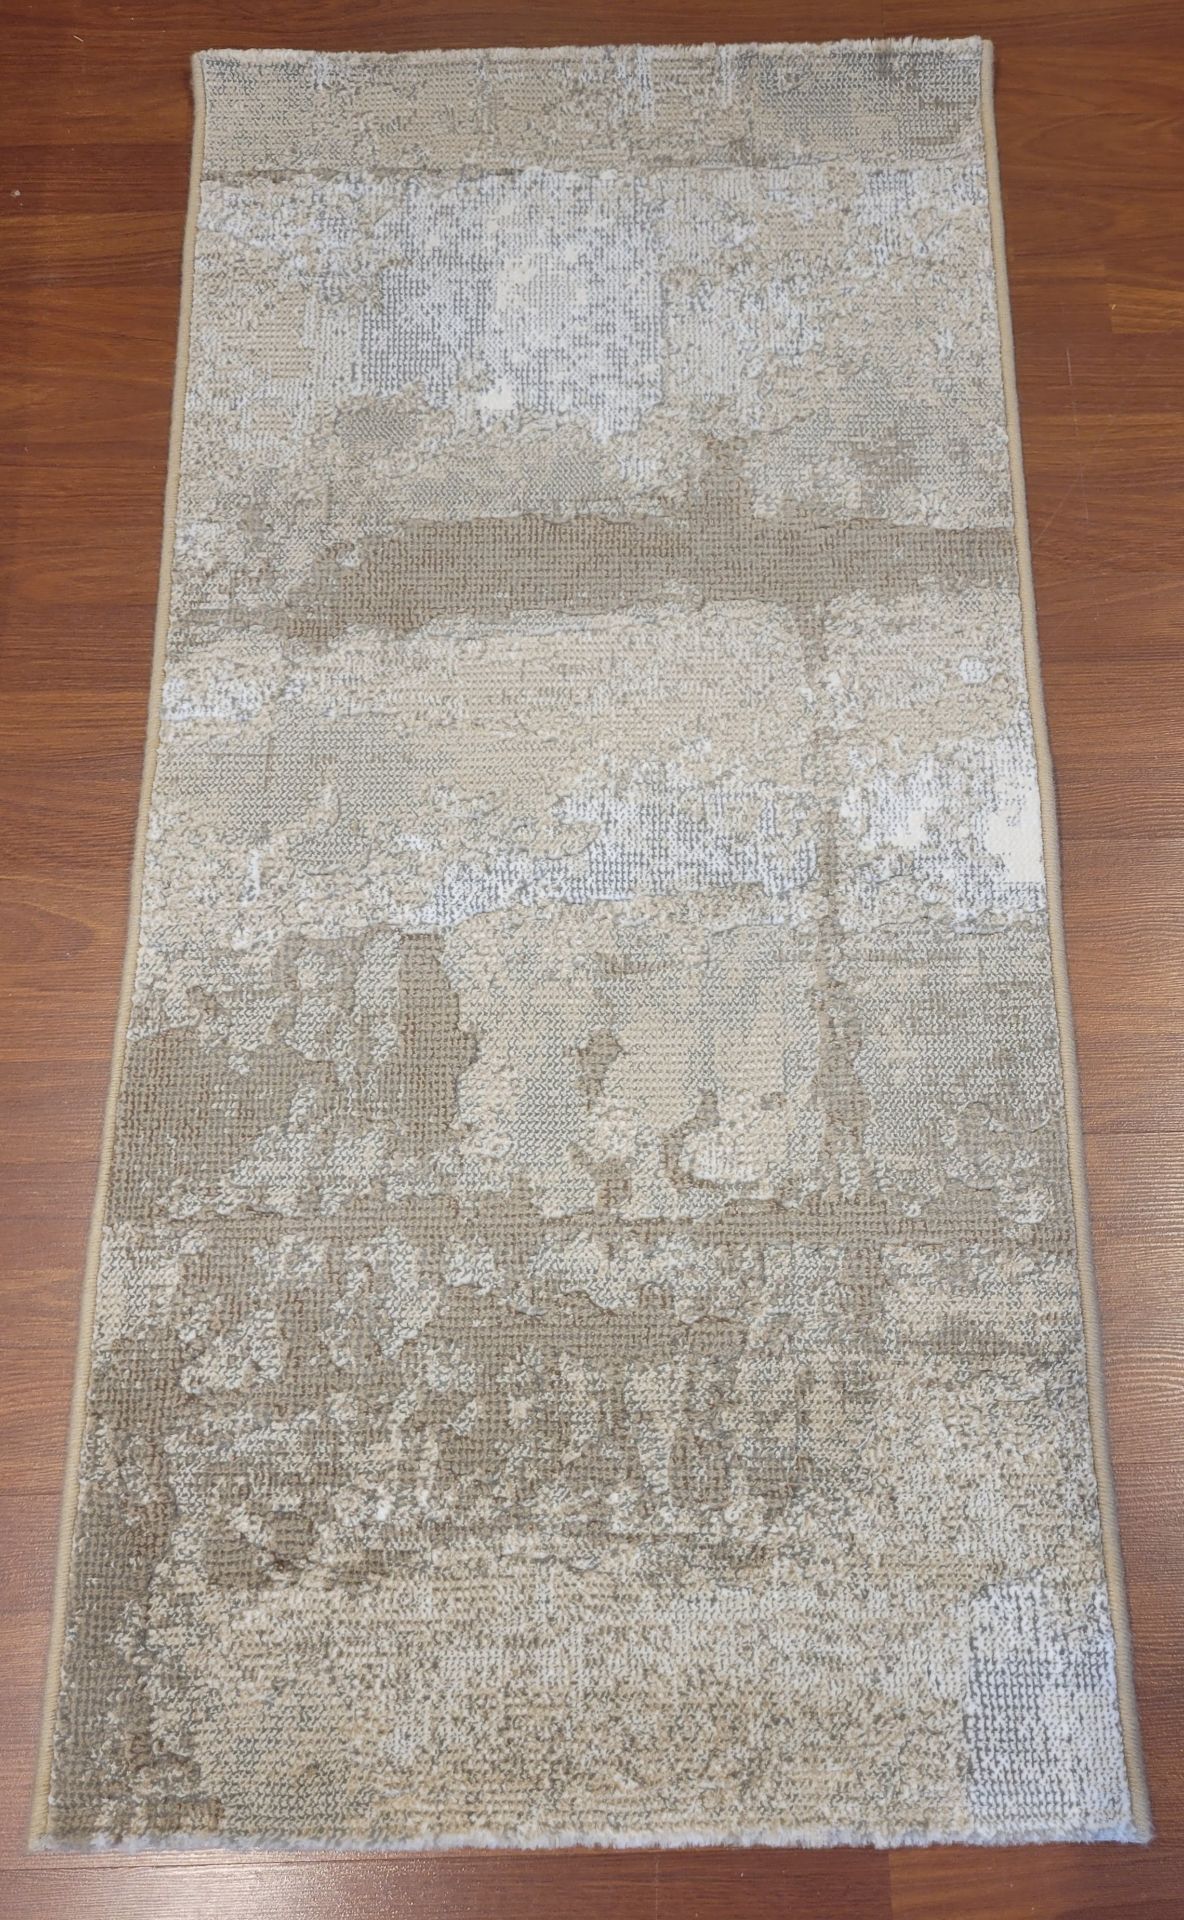 2' X 4' NAXOS MADE IN BELGIUM - MSRP $199.00 EA. (LOCATED IN WALL-TO-WALL) INVENTORY CODE: 12-237